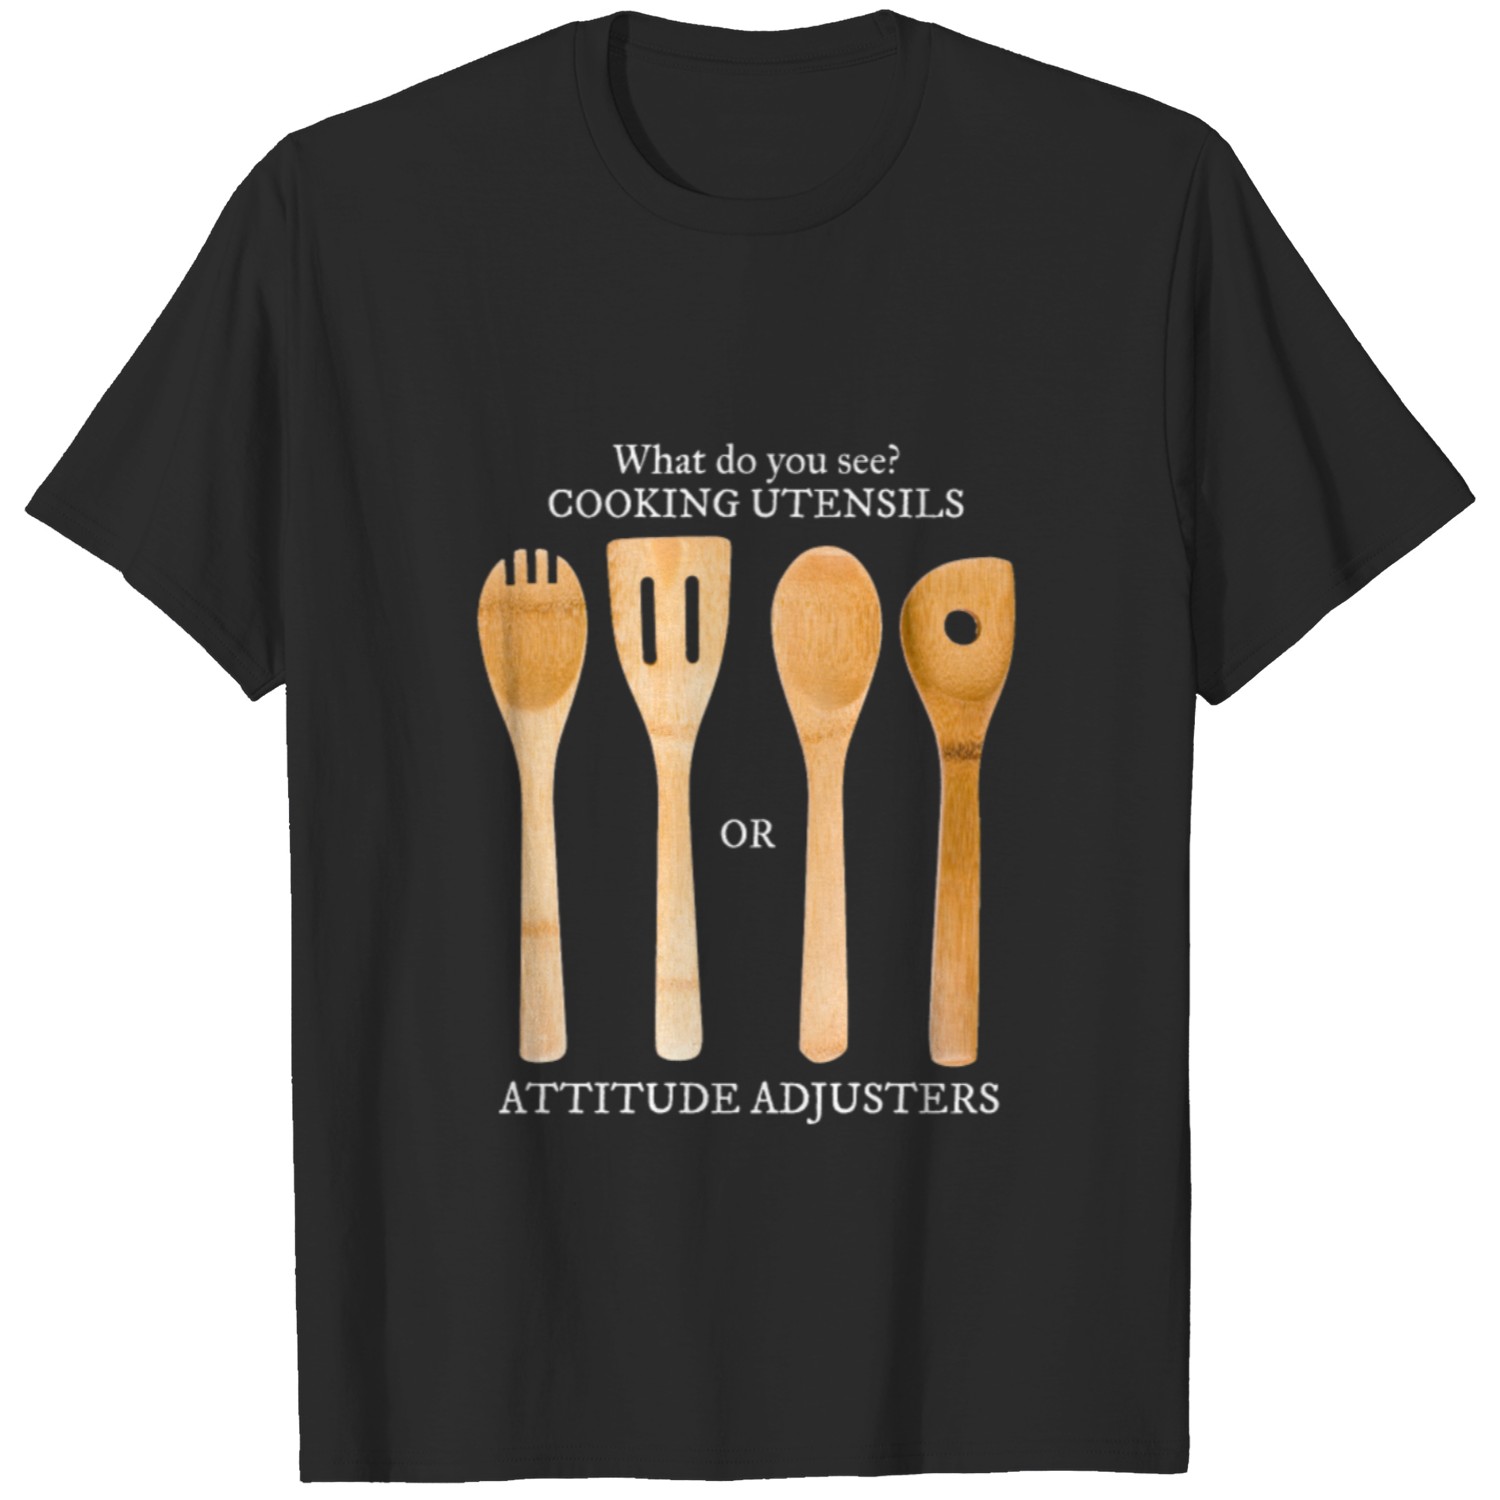 Do You See A Cooking Utensil or Attitude Adjuster T-shirt